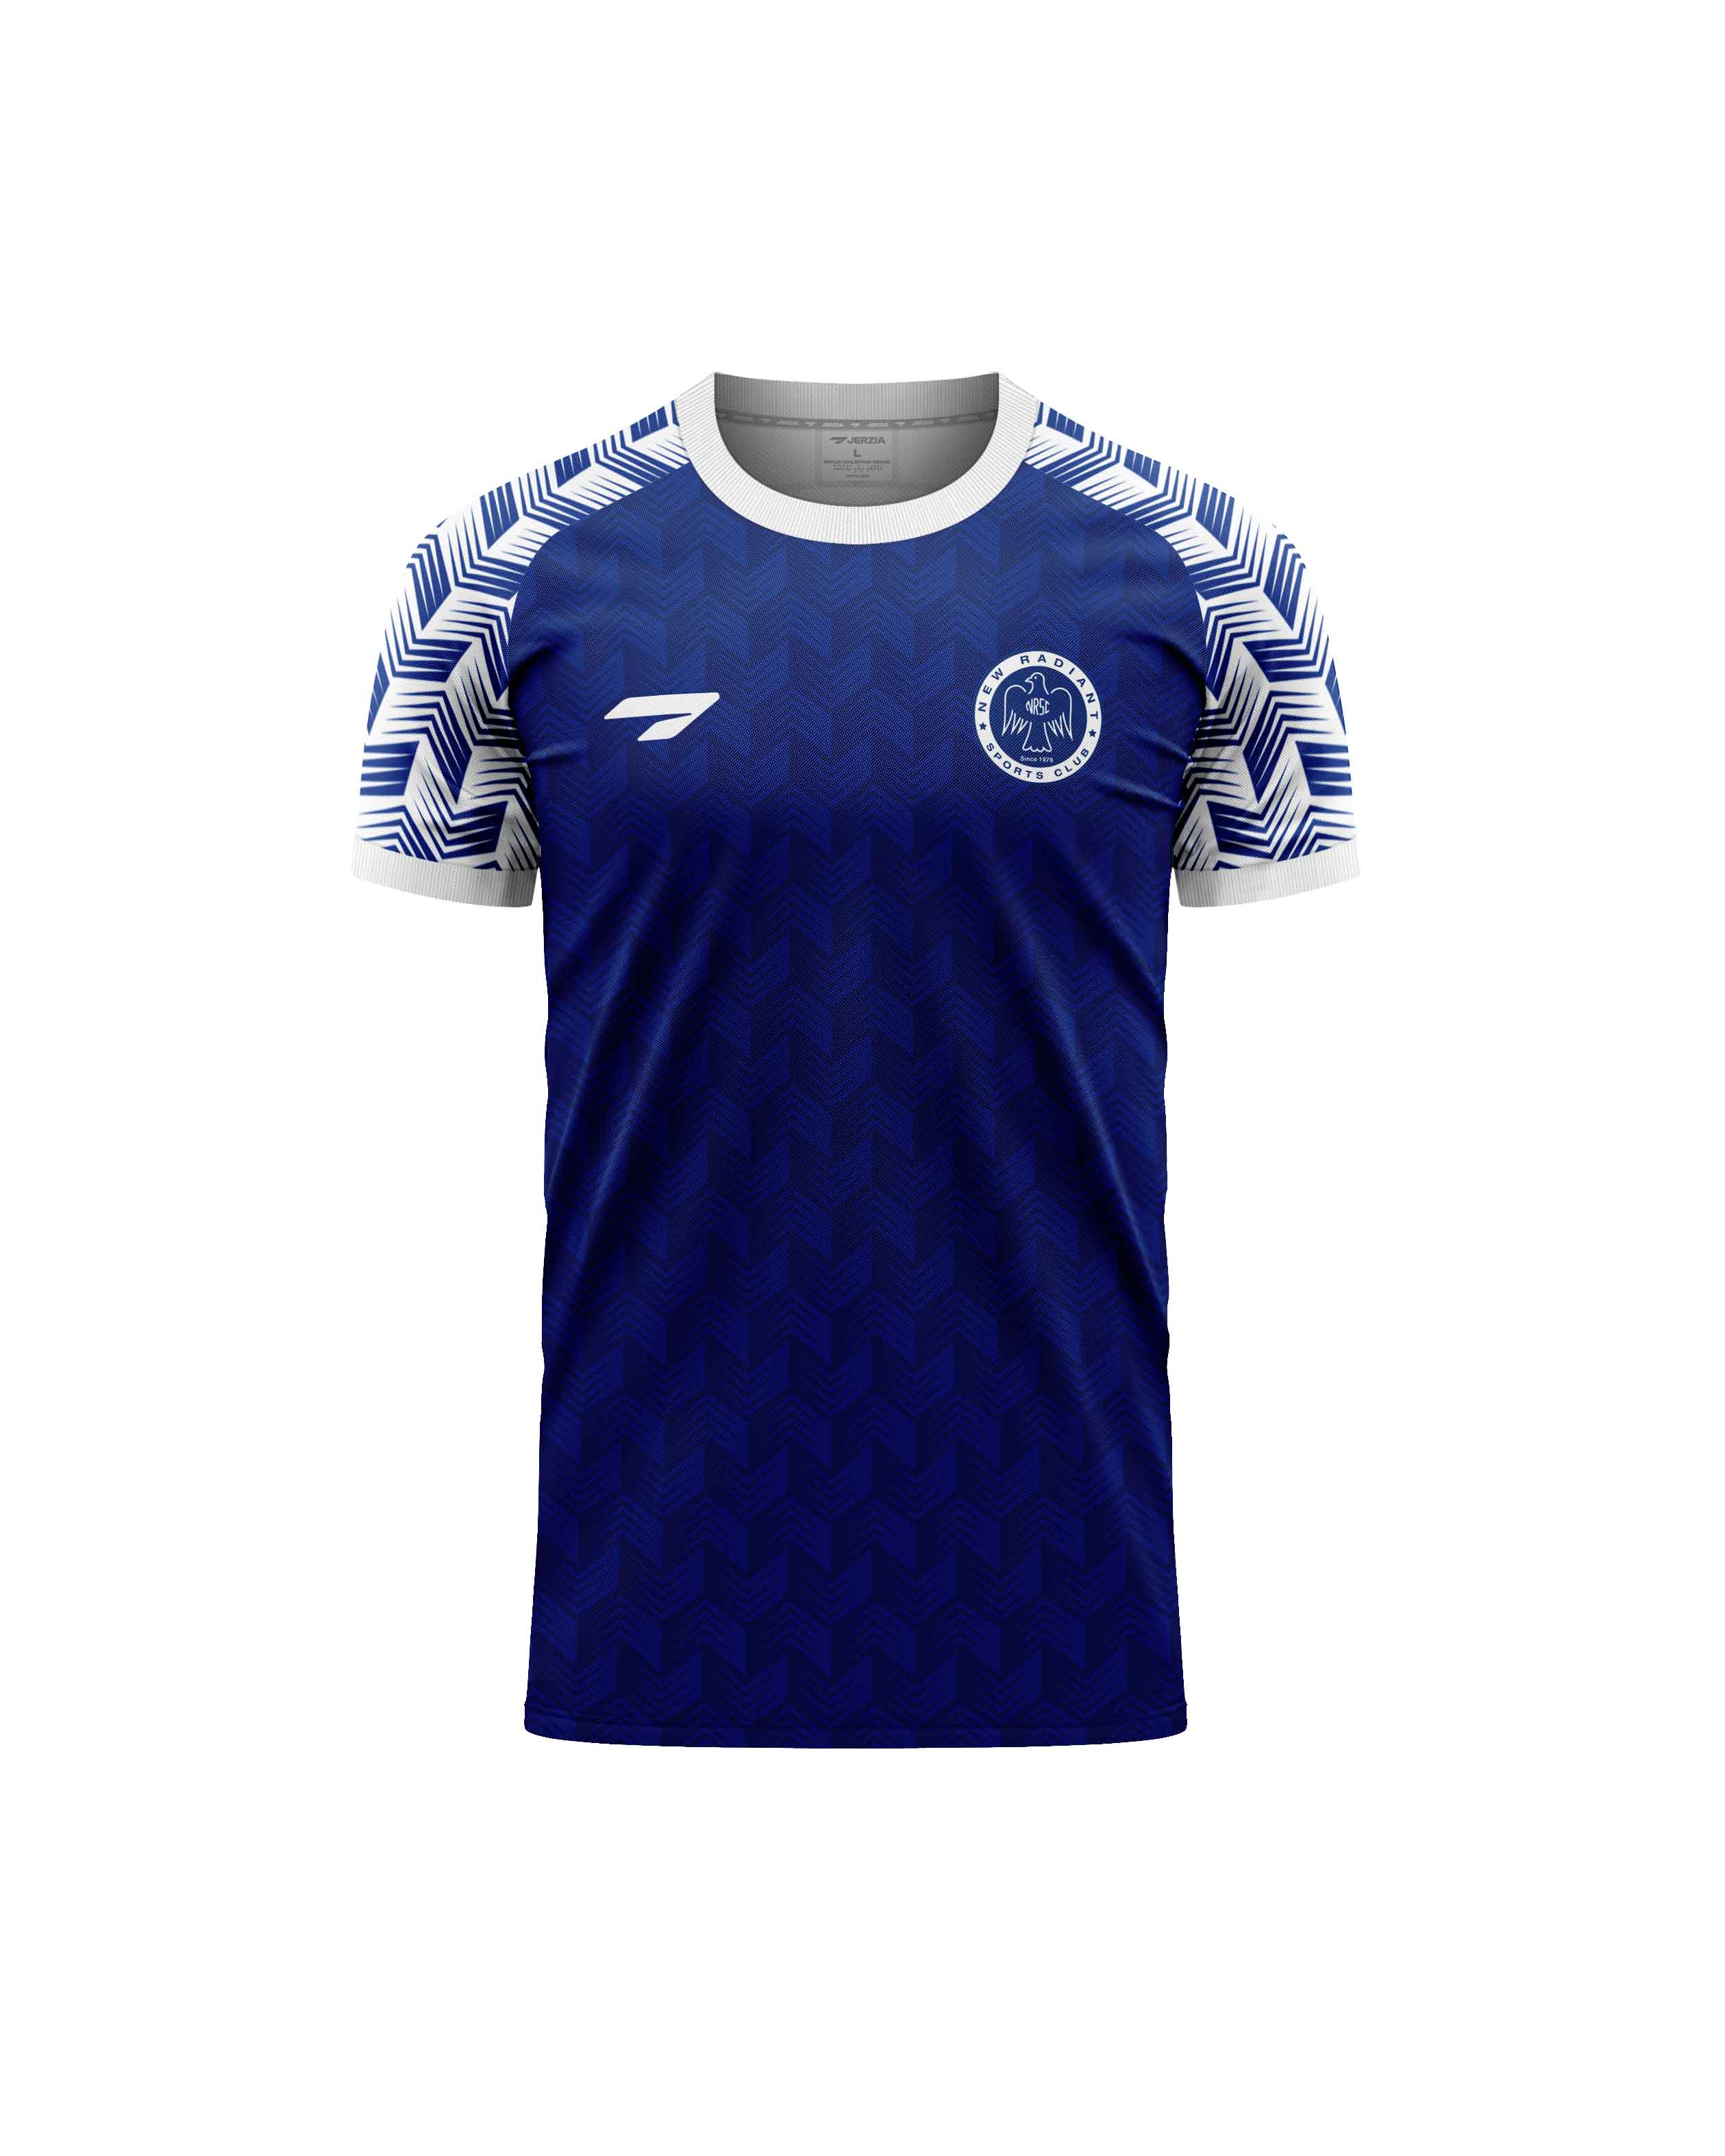 New Radiant Home Supporter Jersey  SS